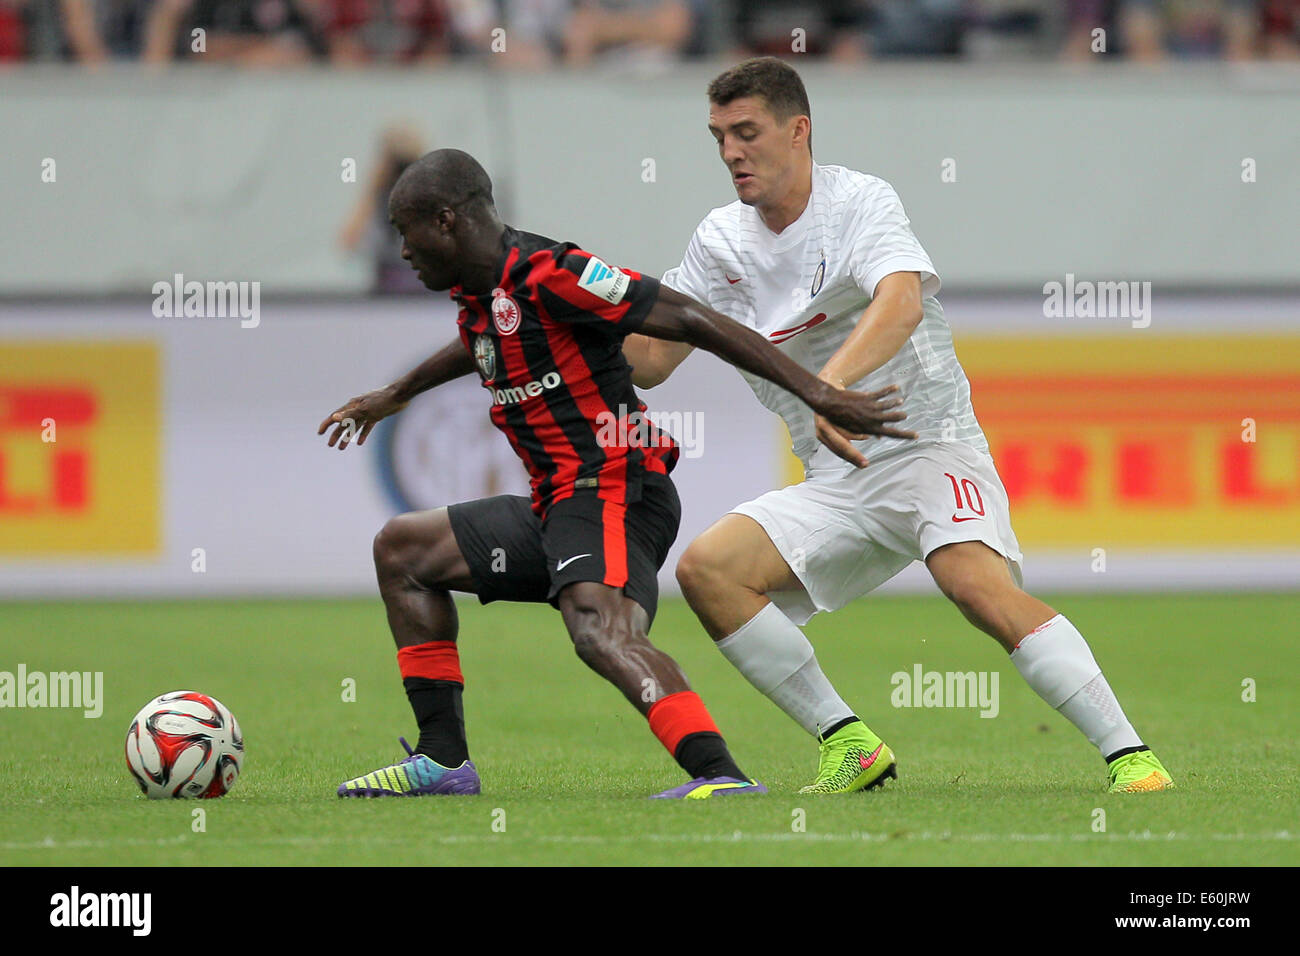 Frankfurt's Constant Djakpa (L) and Milan's Mateo Kovacic (R) vie for the ball during the soccer test match between Eintracht Frankfurt and Inter Milan at Commerzbank arena in Frankfurt/Main, Germany, 10 August 2014. Photo: Fredrik von Erichsen/dpa Stock Photo